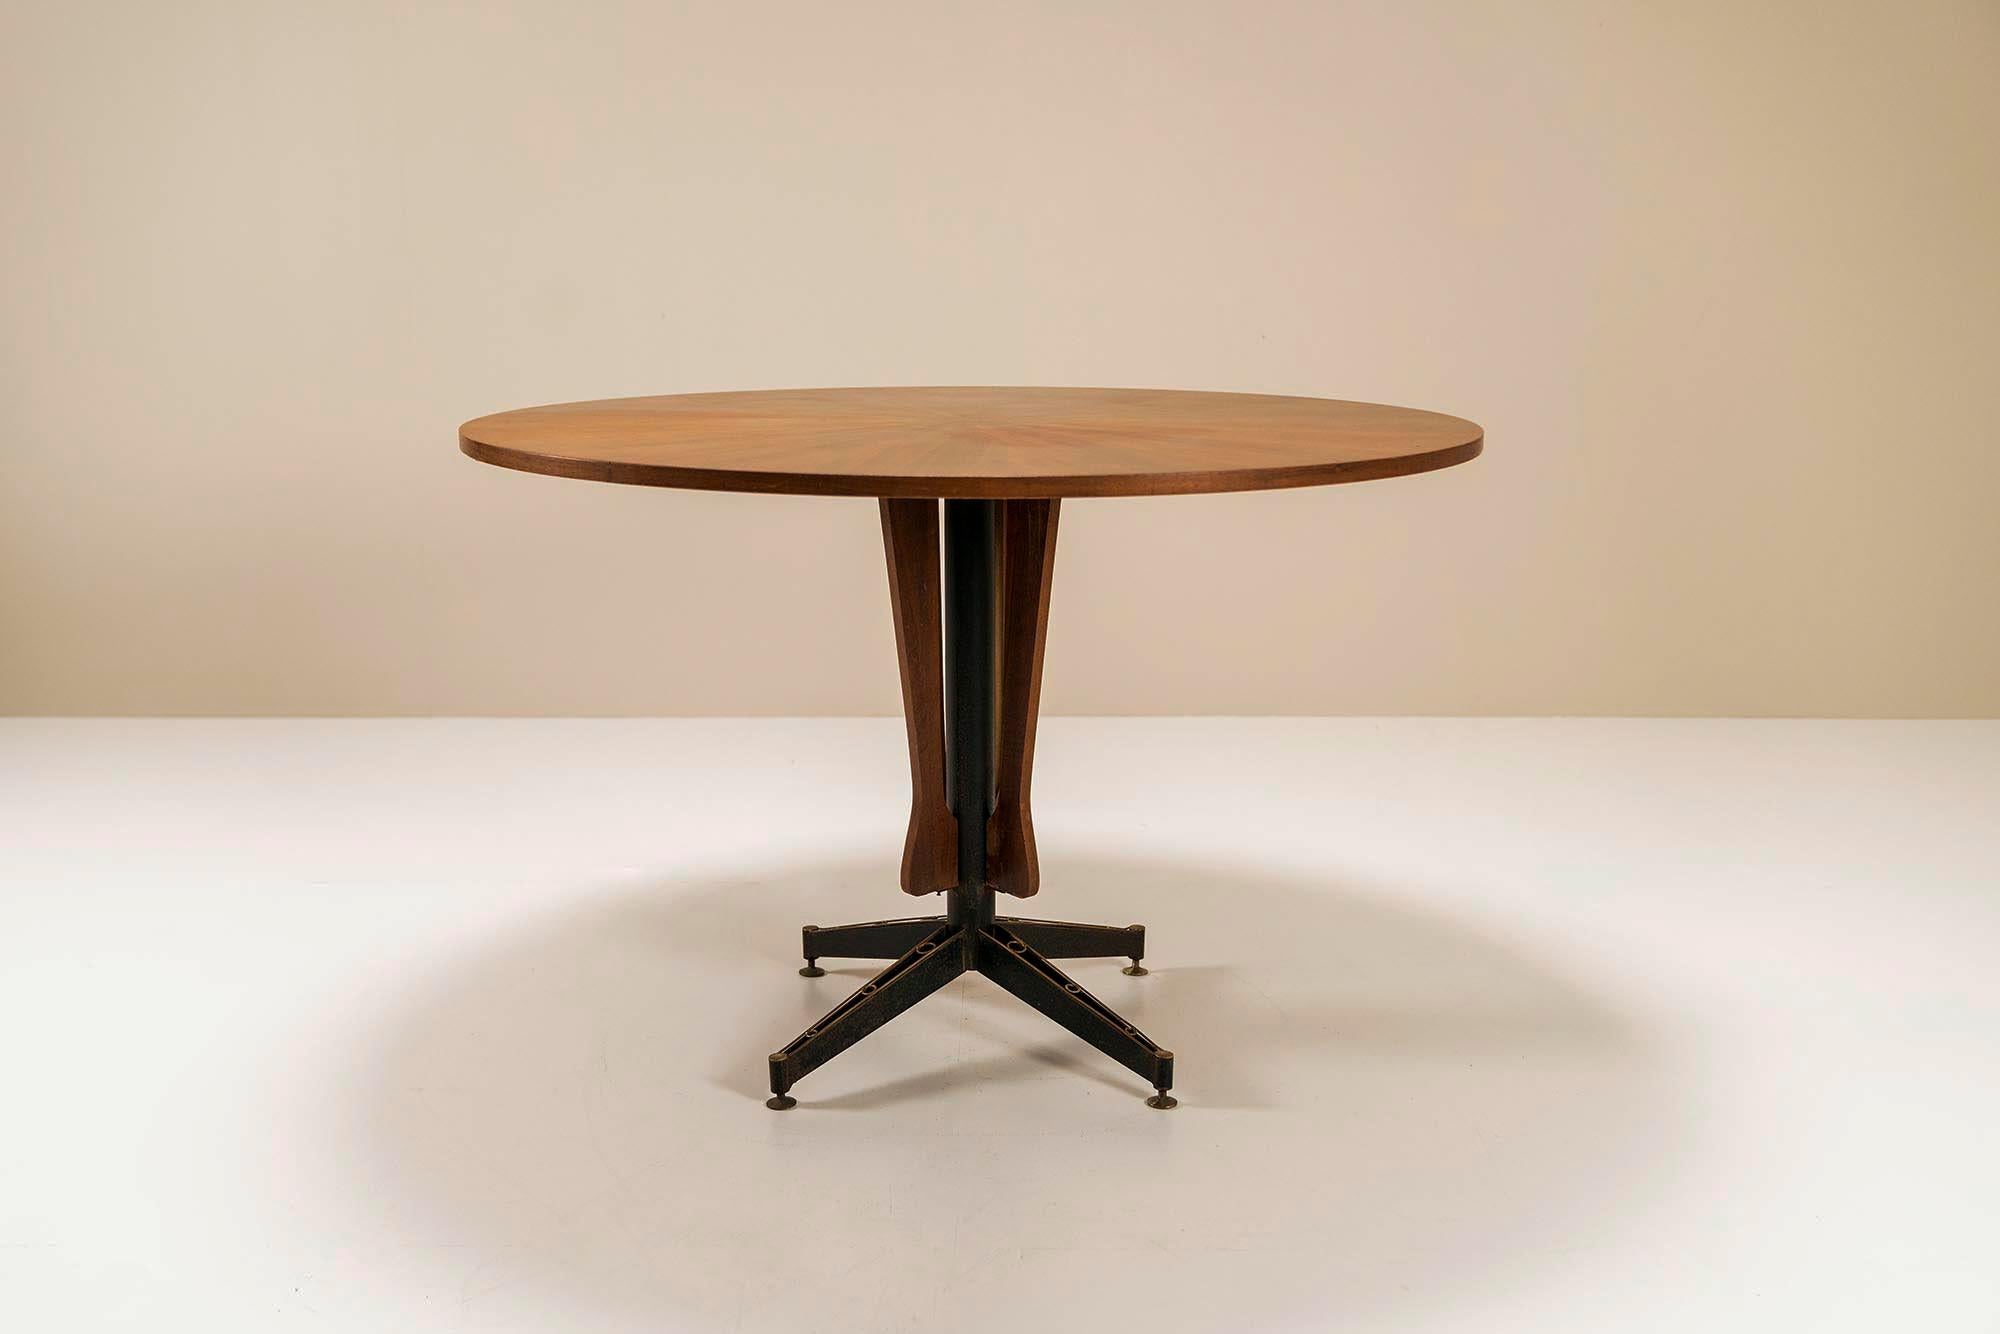 Italian Carlo Ratti Round Dining Table Made by Lissoni, Italy, 1950s